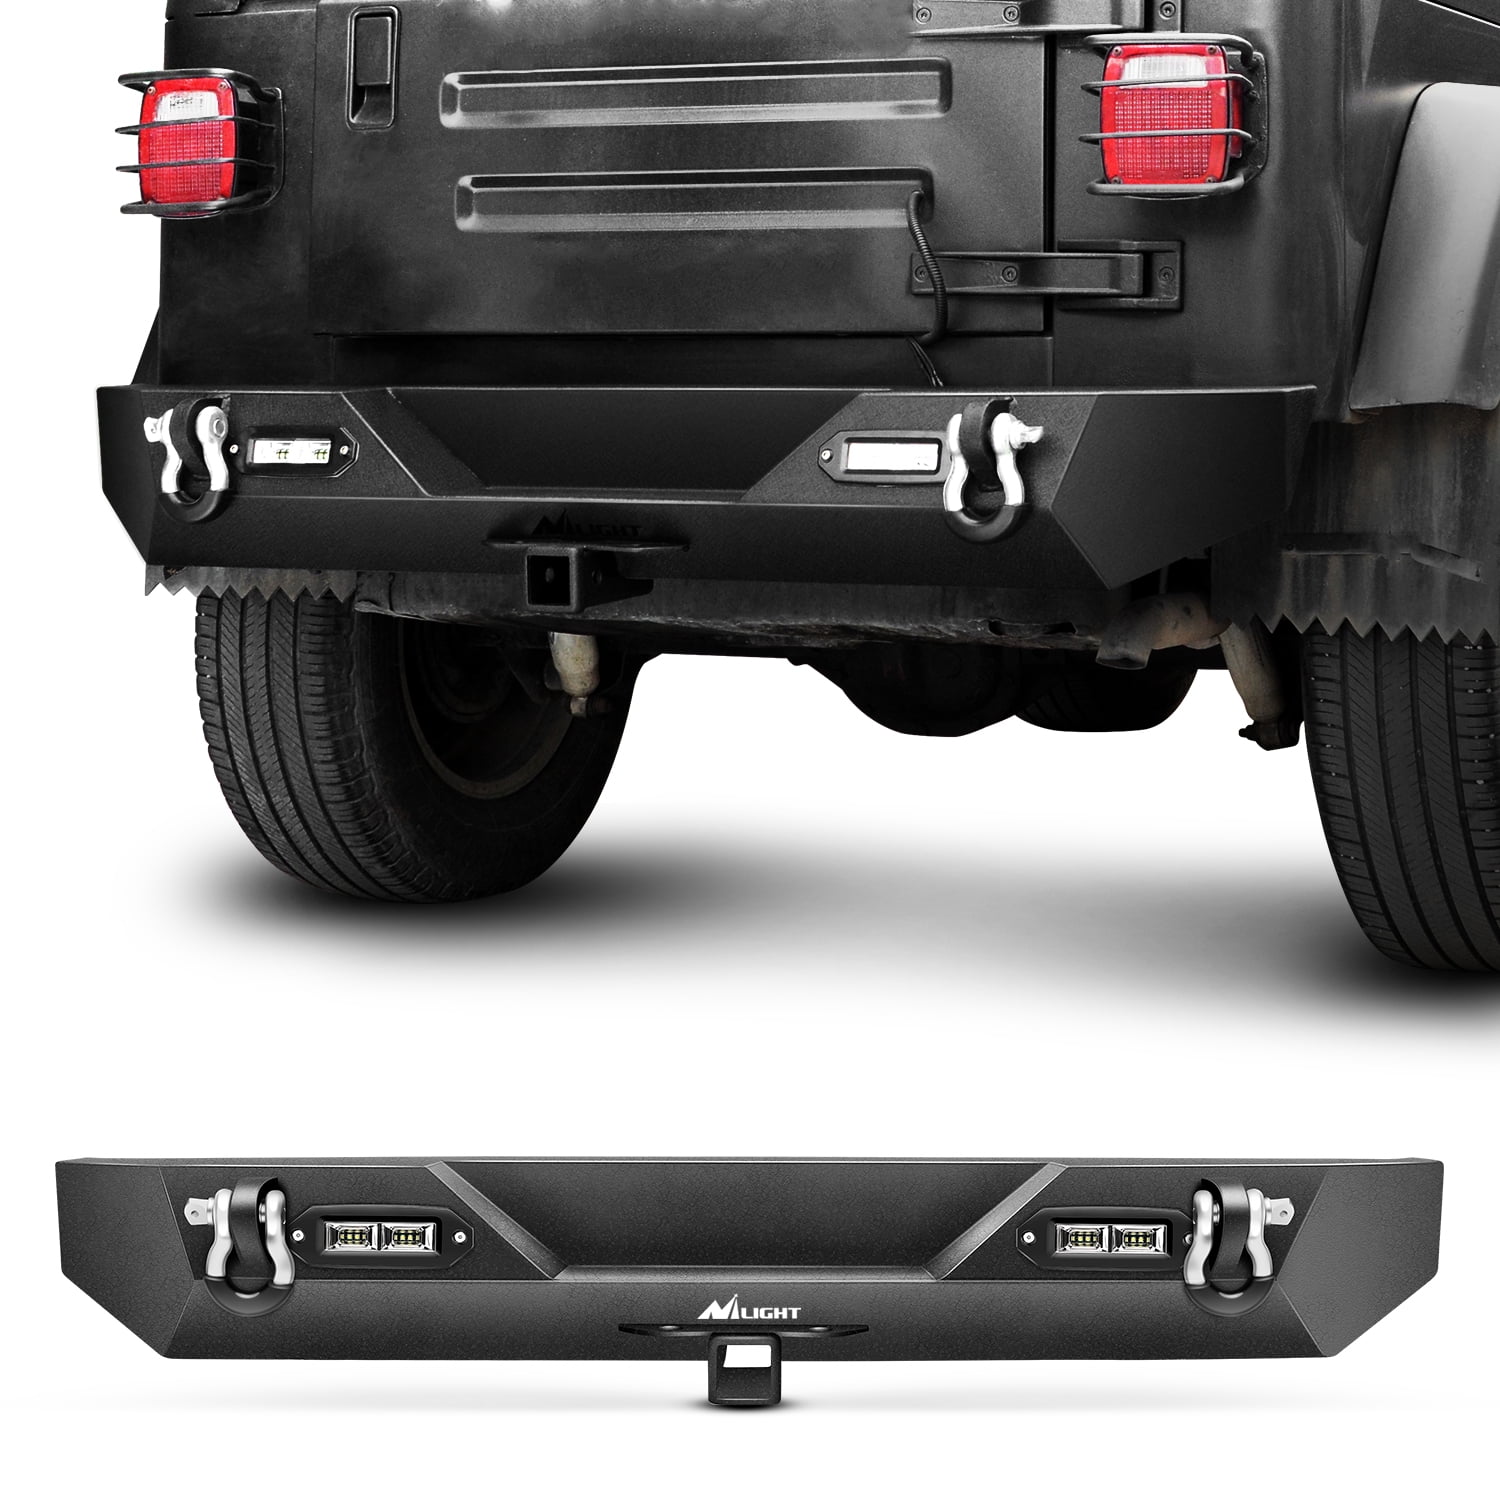 Nilight JK-54A 87-06 Rear Compatible for 1987-2006 Jeep Wrangler TJ&YJ,Rock  Crawler Bumper with Hitch Receiver & 2X Nilight Upgraded 18W LED Lights Off  Road Textured Black,2 Years Warranty 